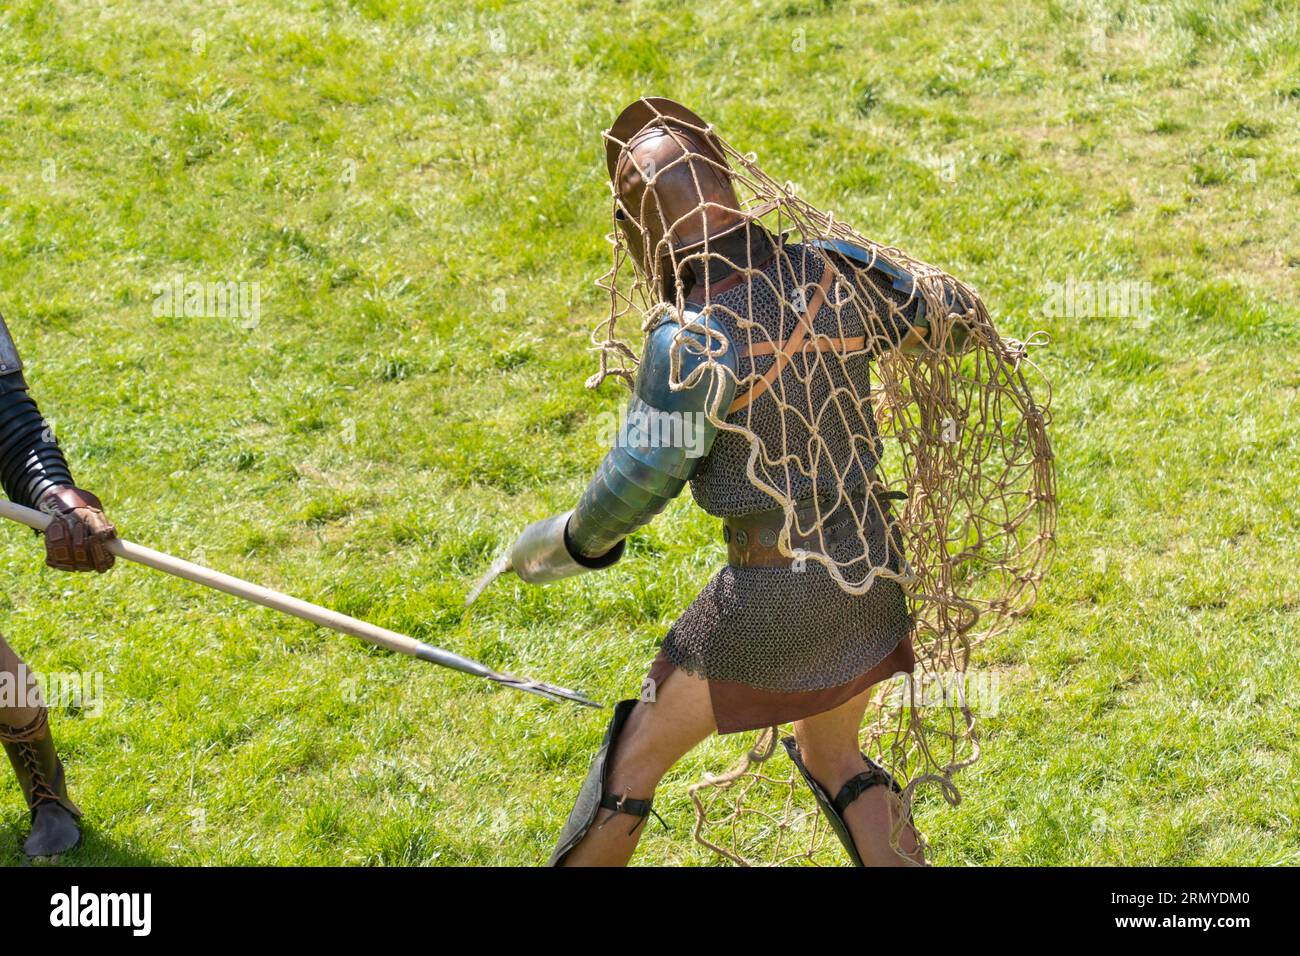 A Roman gladiator entangled in a net fights on a green grass field Stock Photo